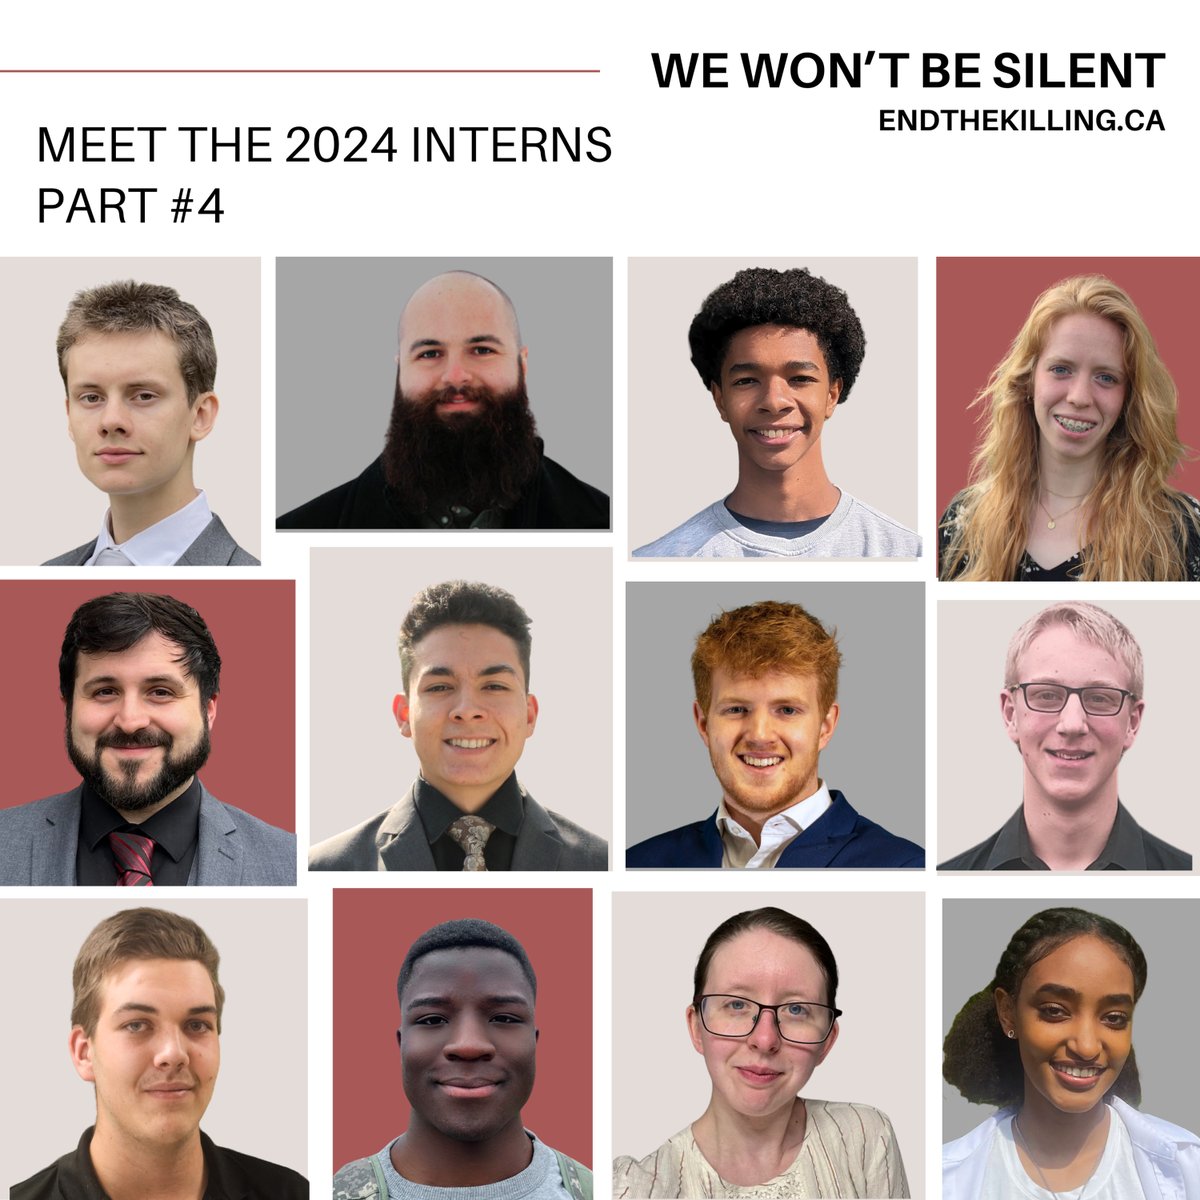 We invite you to stand together with the team! Share our posts with your friends and family, pray for each member of the team, and donate towards the work that is being done. Endthekilling.ca/donate  

#WeWontBeSilent #endthekilling #prolifegeneration #internship #humanrights